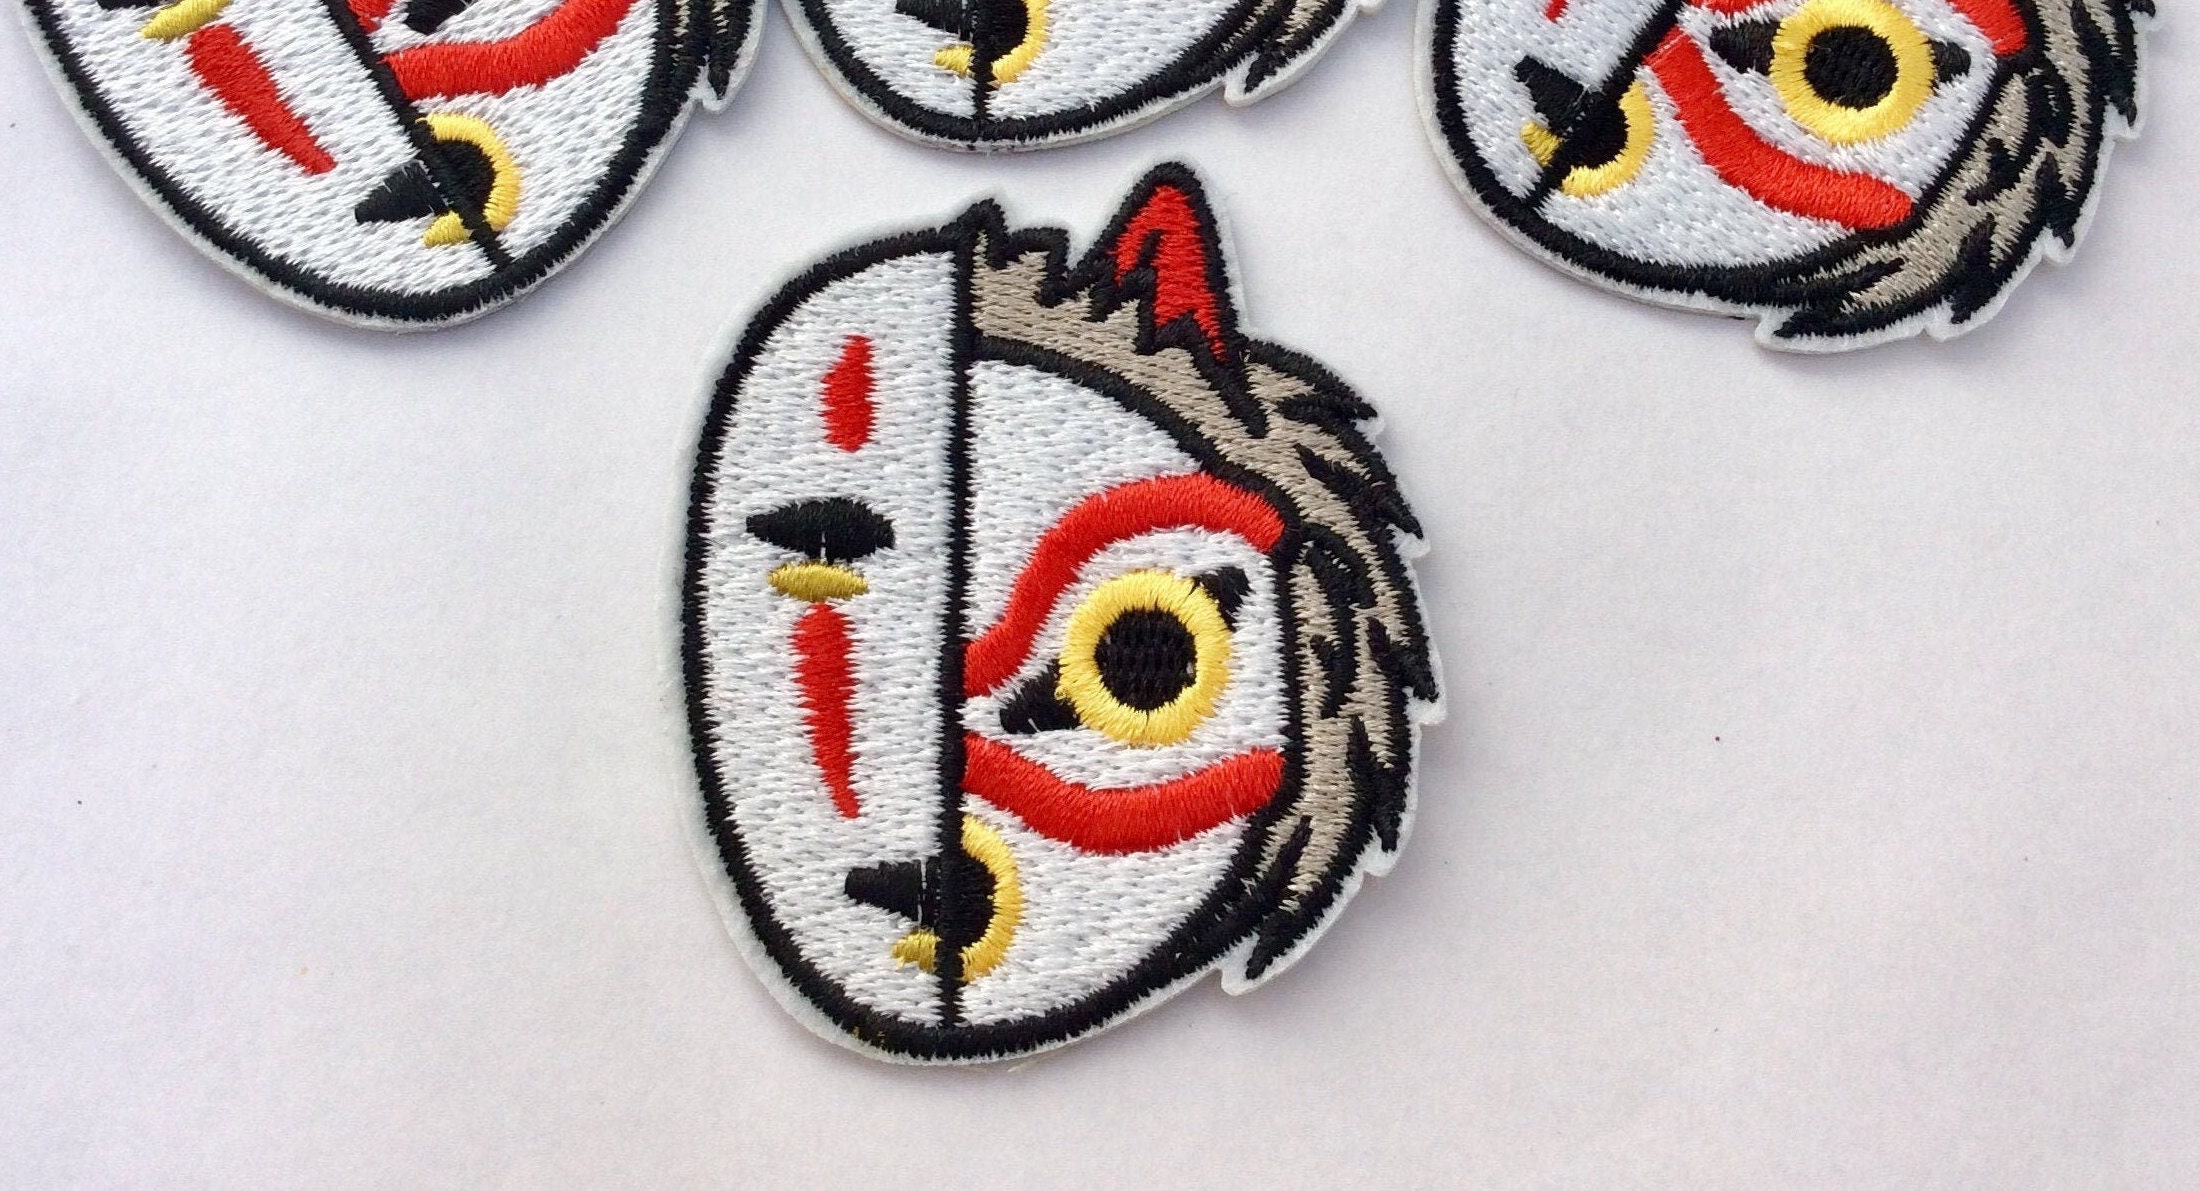 NineTails  Check out these Anime iron on patches available now at  NineTails Add a pop to your jacket or denim with your favorite Anime  characters and symbols There iron on patches